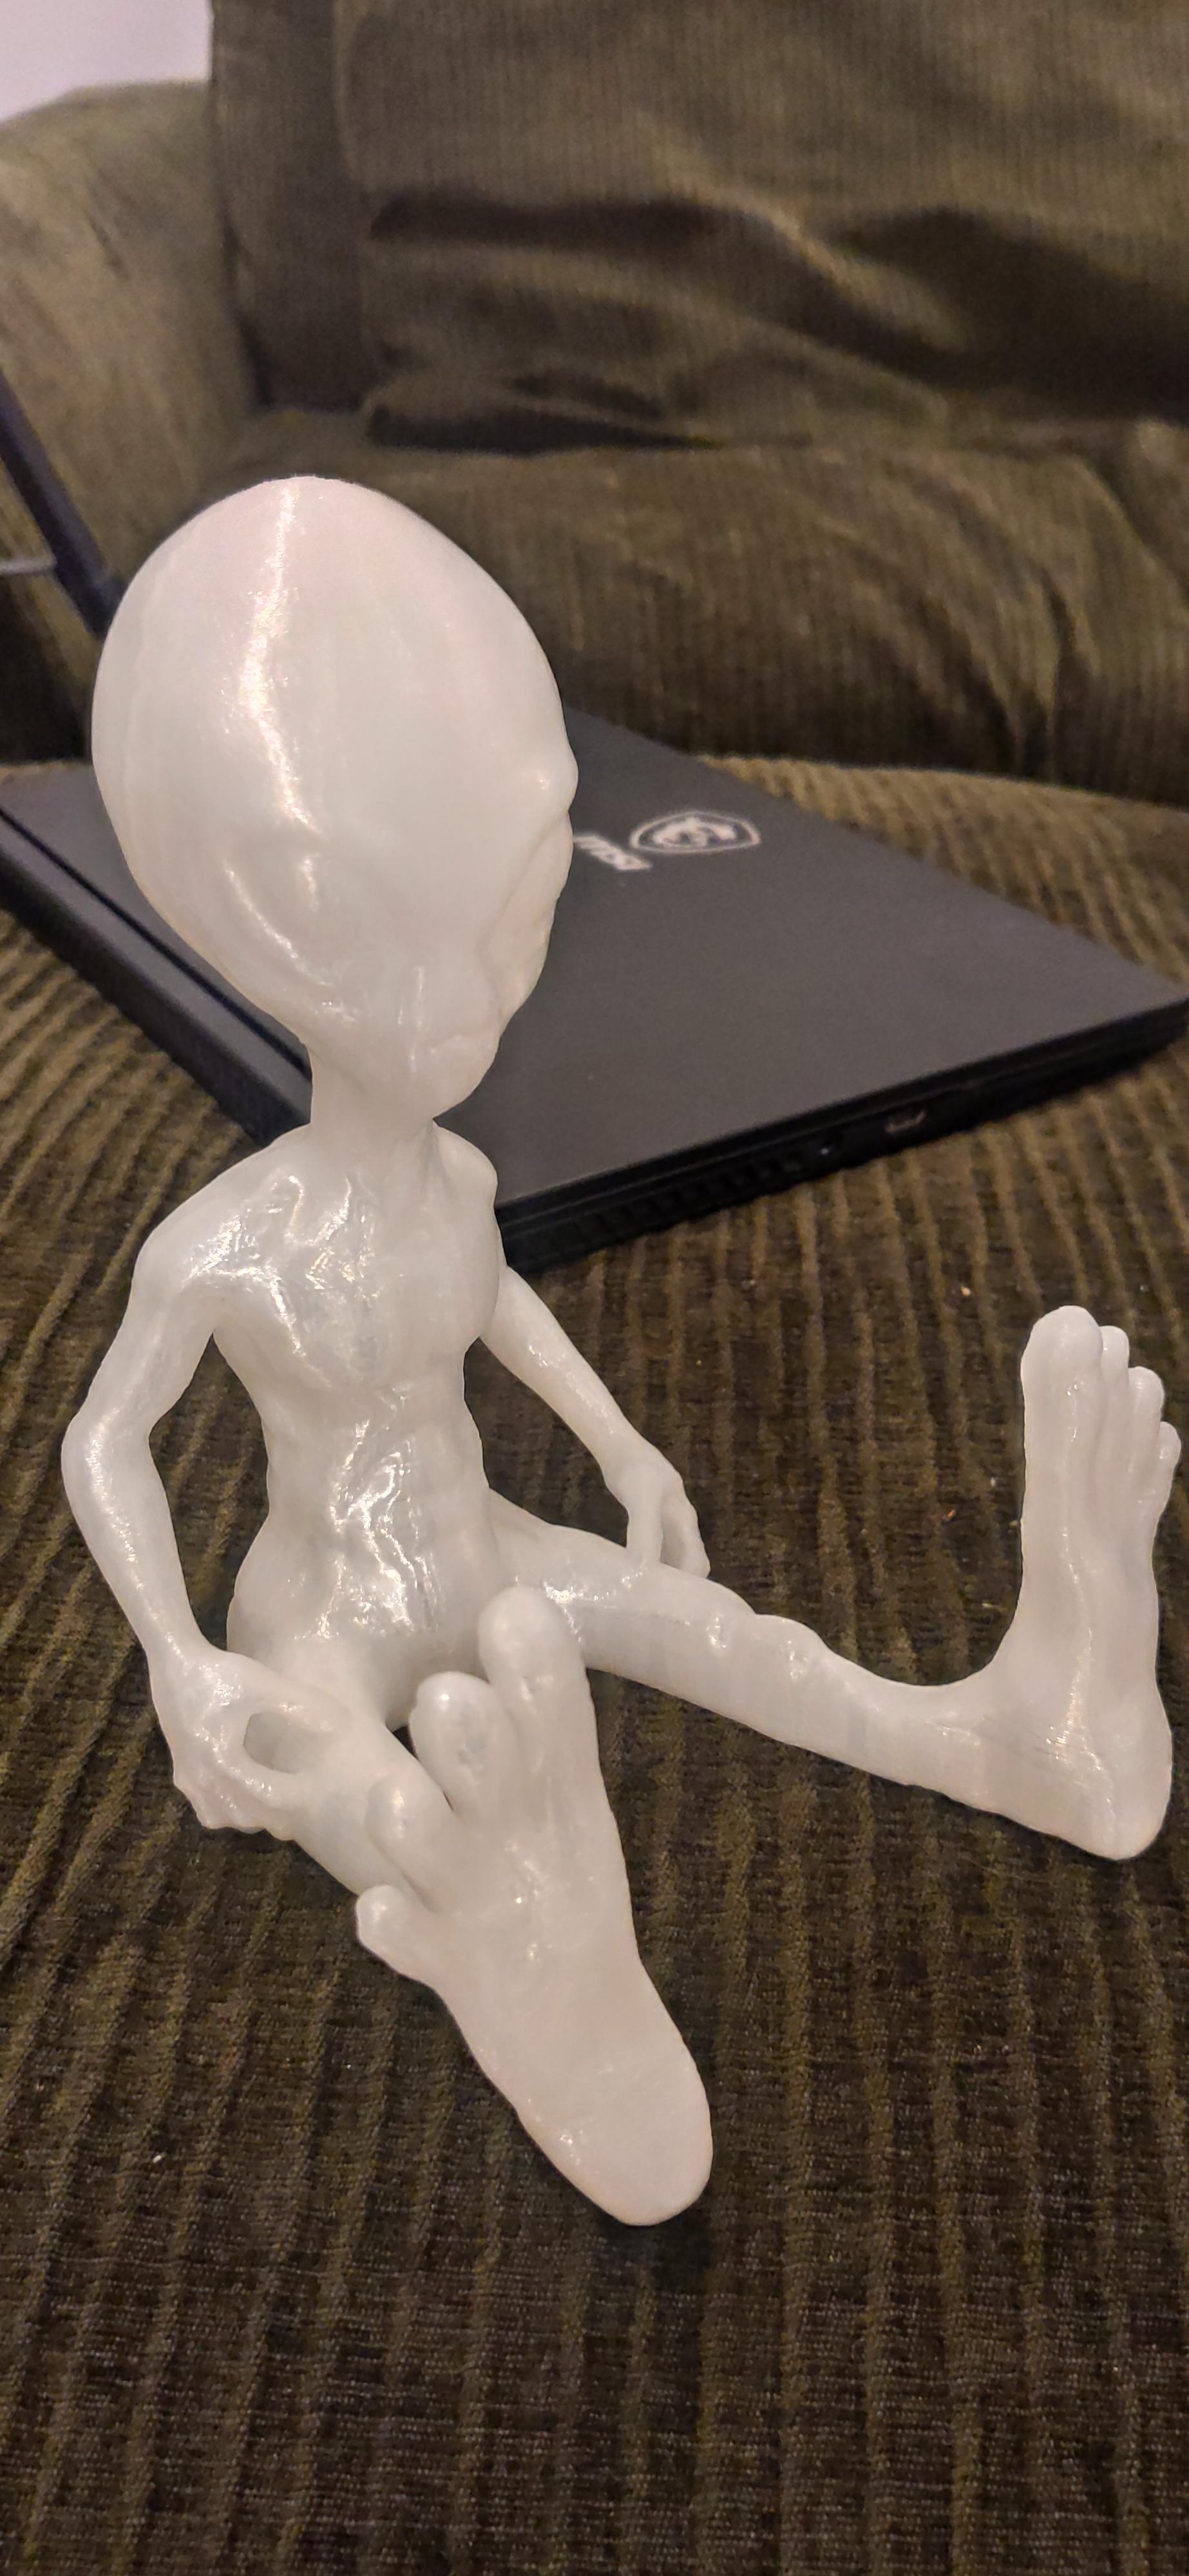 I Want to Believe 🛸 - Sunlu T3 ⚡ https://bit.ly/3dpCts4

I can definitely trust this printer 😉
0.2 L.Height, 200/50c, 75mm/s, PLA - Clas Ohlson
I scale up to 200mm height, No raft No support
came out really nice 👌 - 3d model